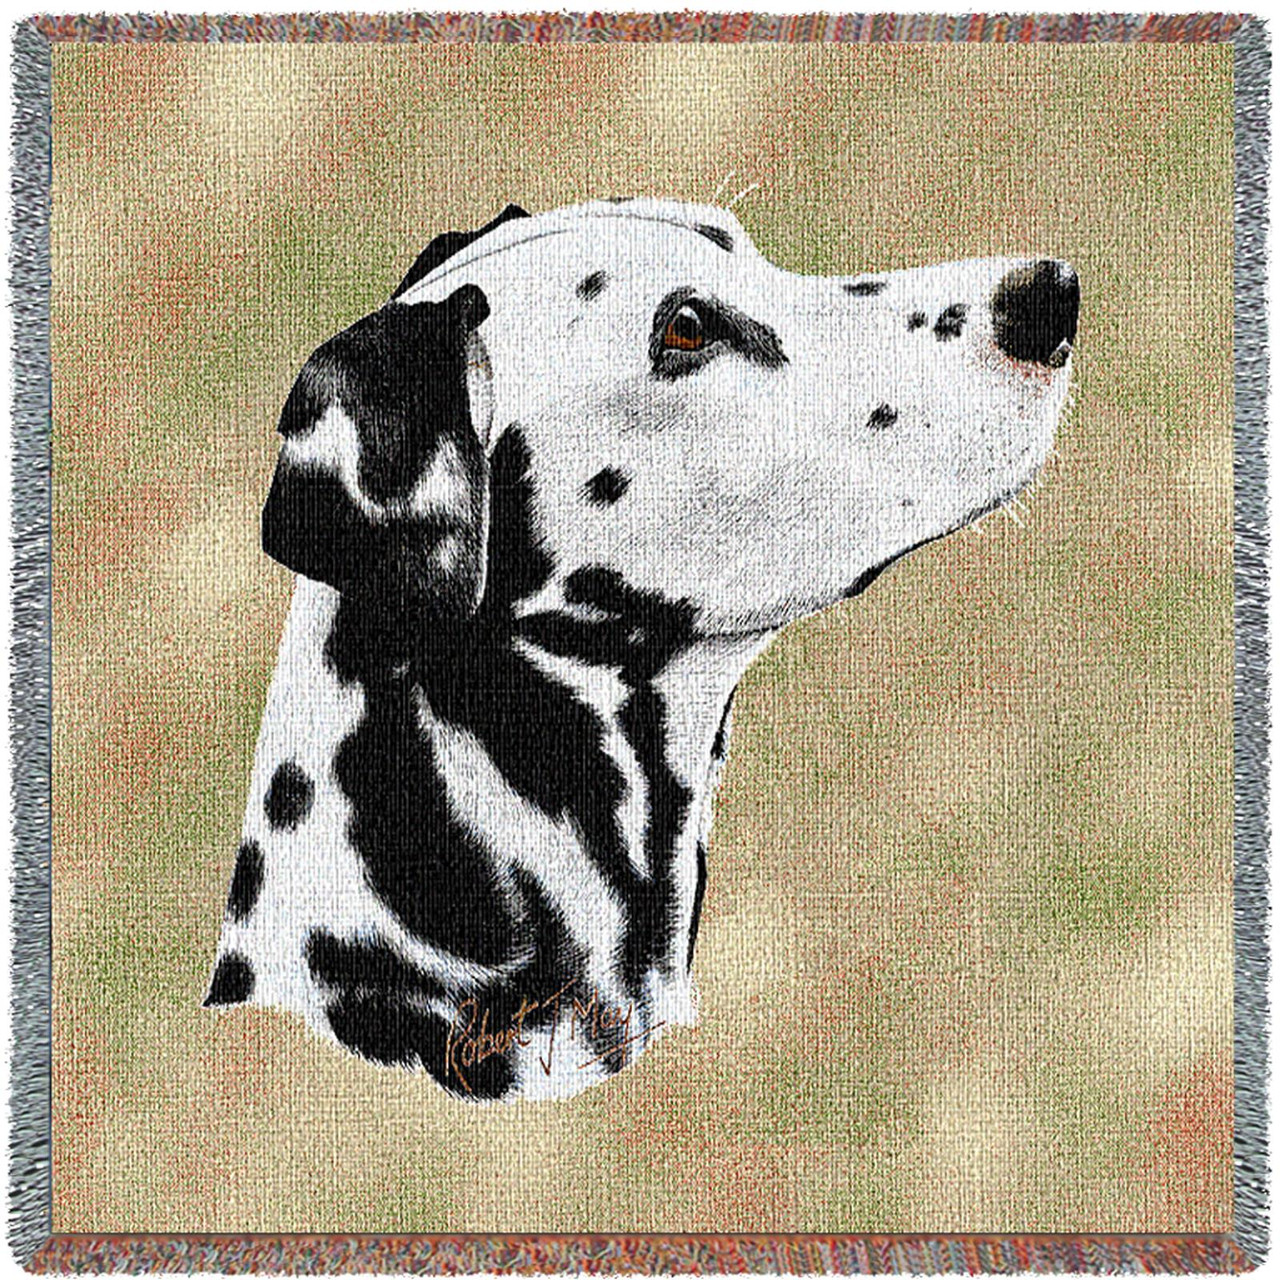 Dalmatian May - Lap Square Cotton Woven Blanket Throw - Made in the USA (54x54)